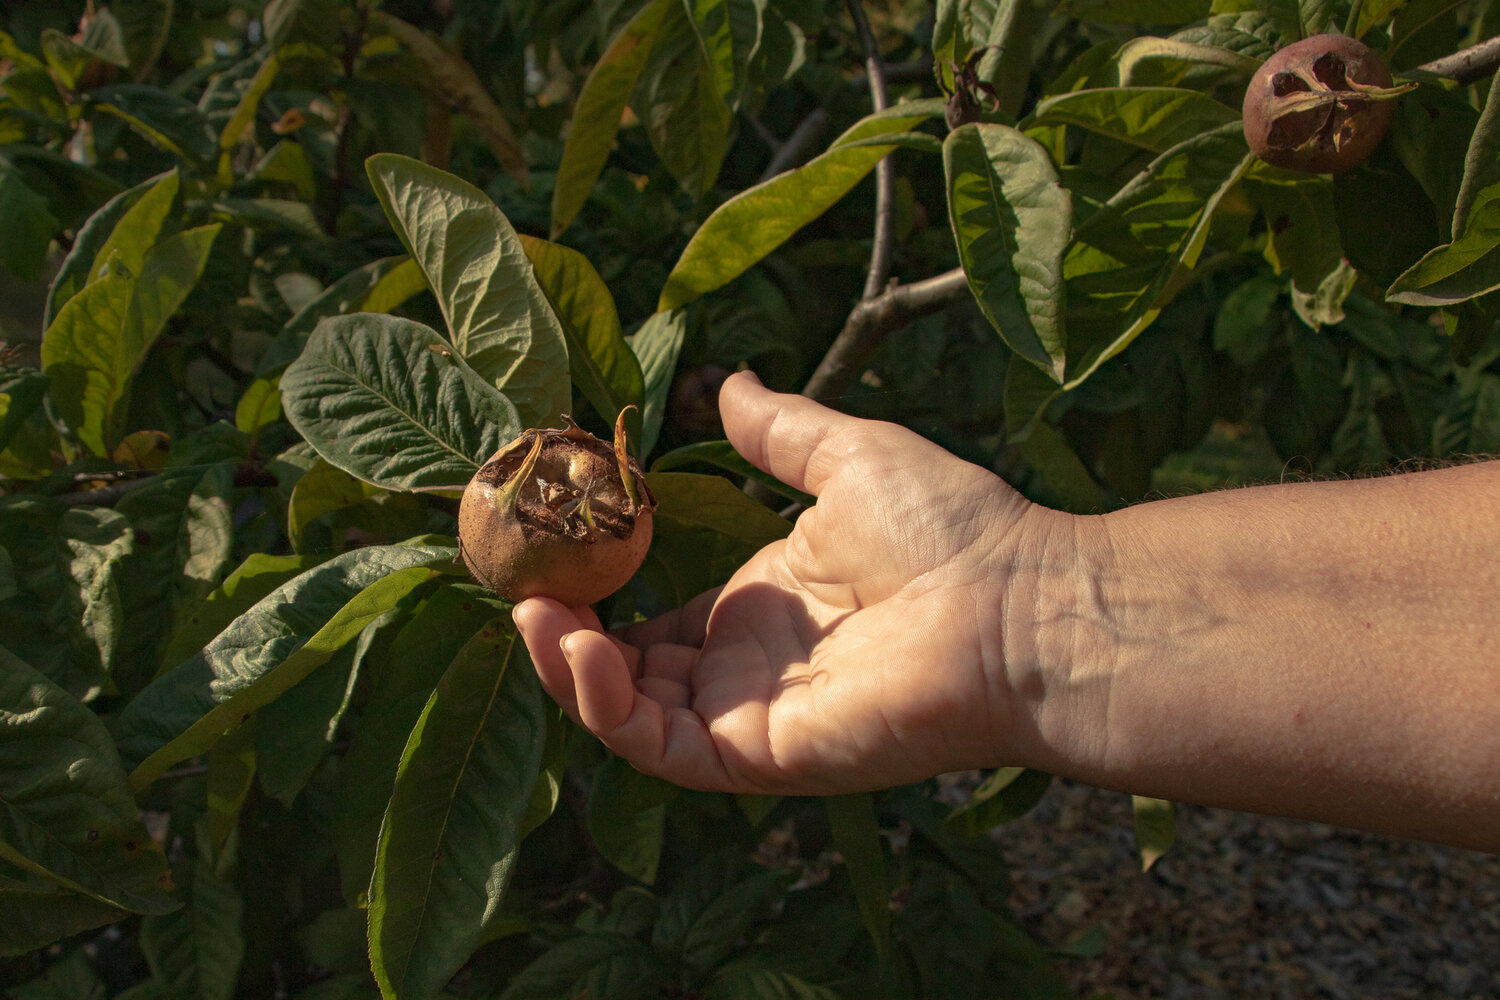 A medlar, which is a fruit harvested by humans since ancient times, is seen at LaCamas Creek Farm on Sunday, Oct. 8.